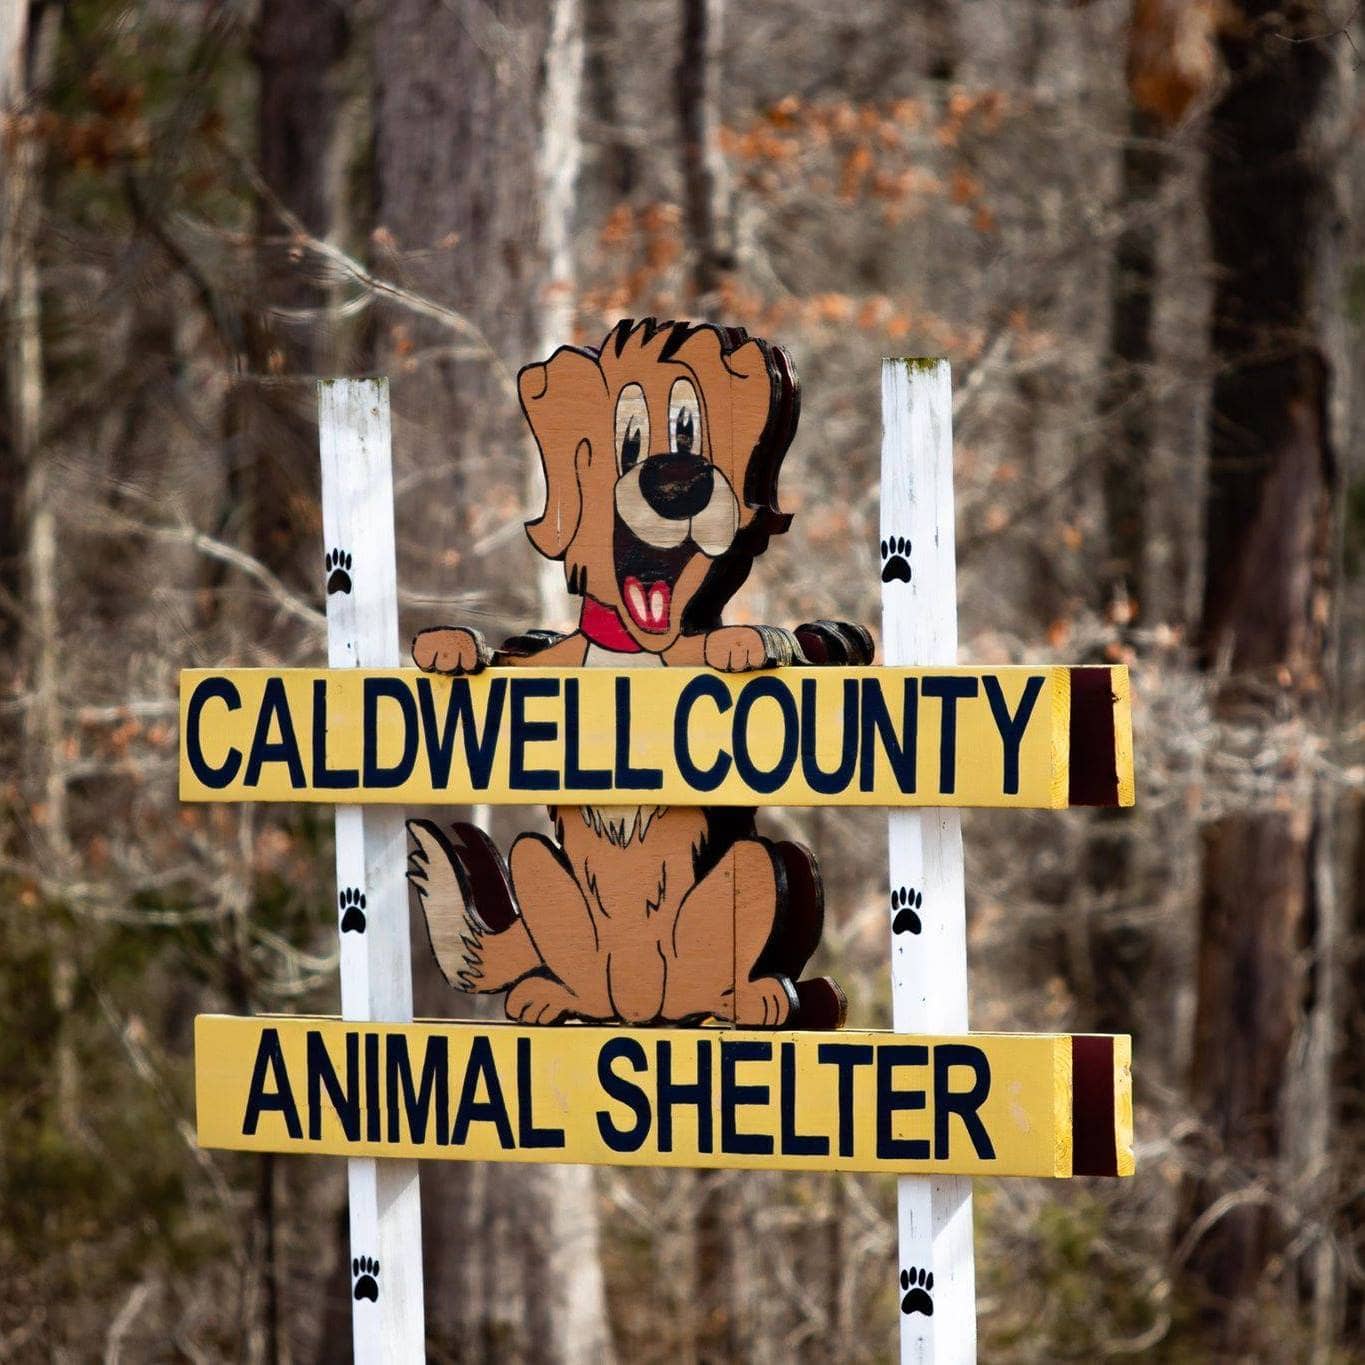 Caldwell County Animal Shelter In Need of Donations | WPKY  FM - 1580  AM